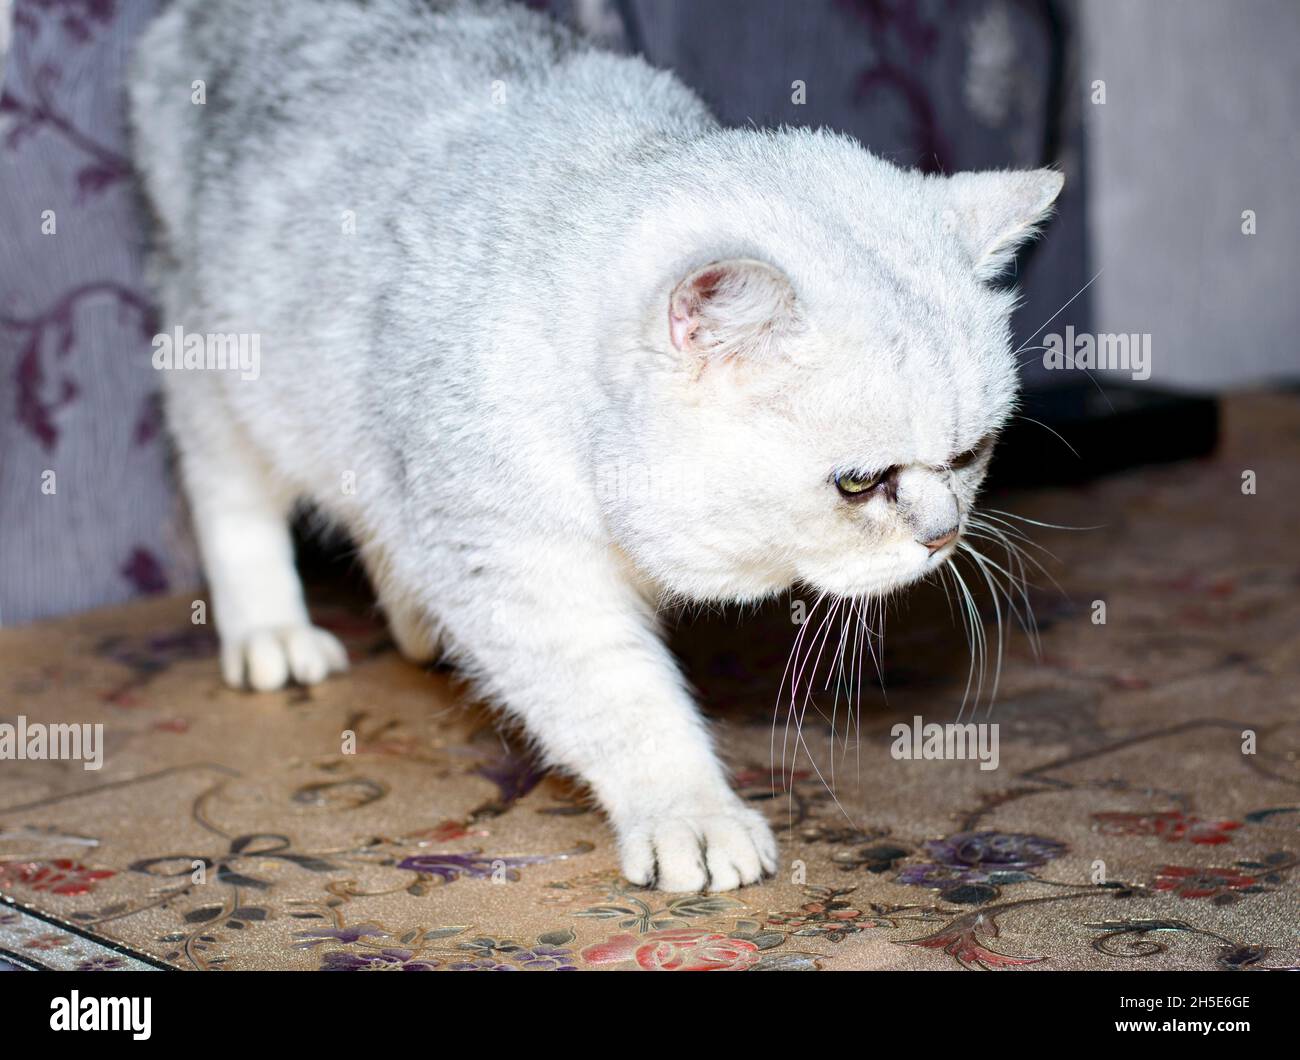 British silver chinchilla on the table, the theme of domestic cats Stock Photo